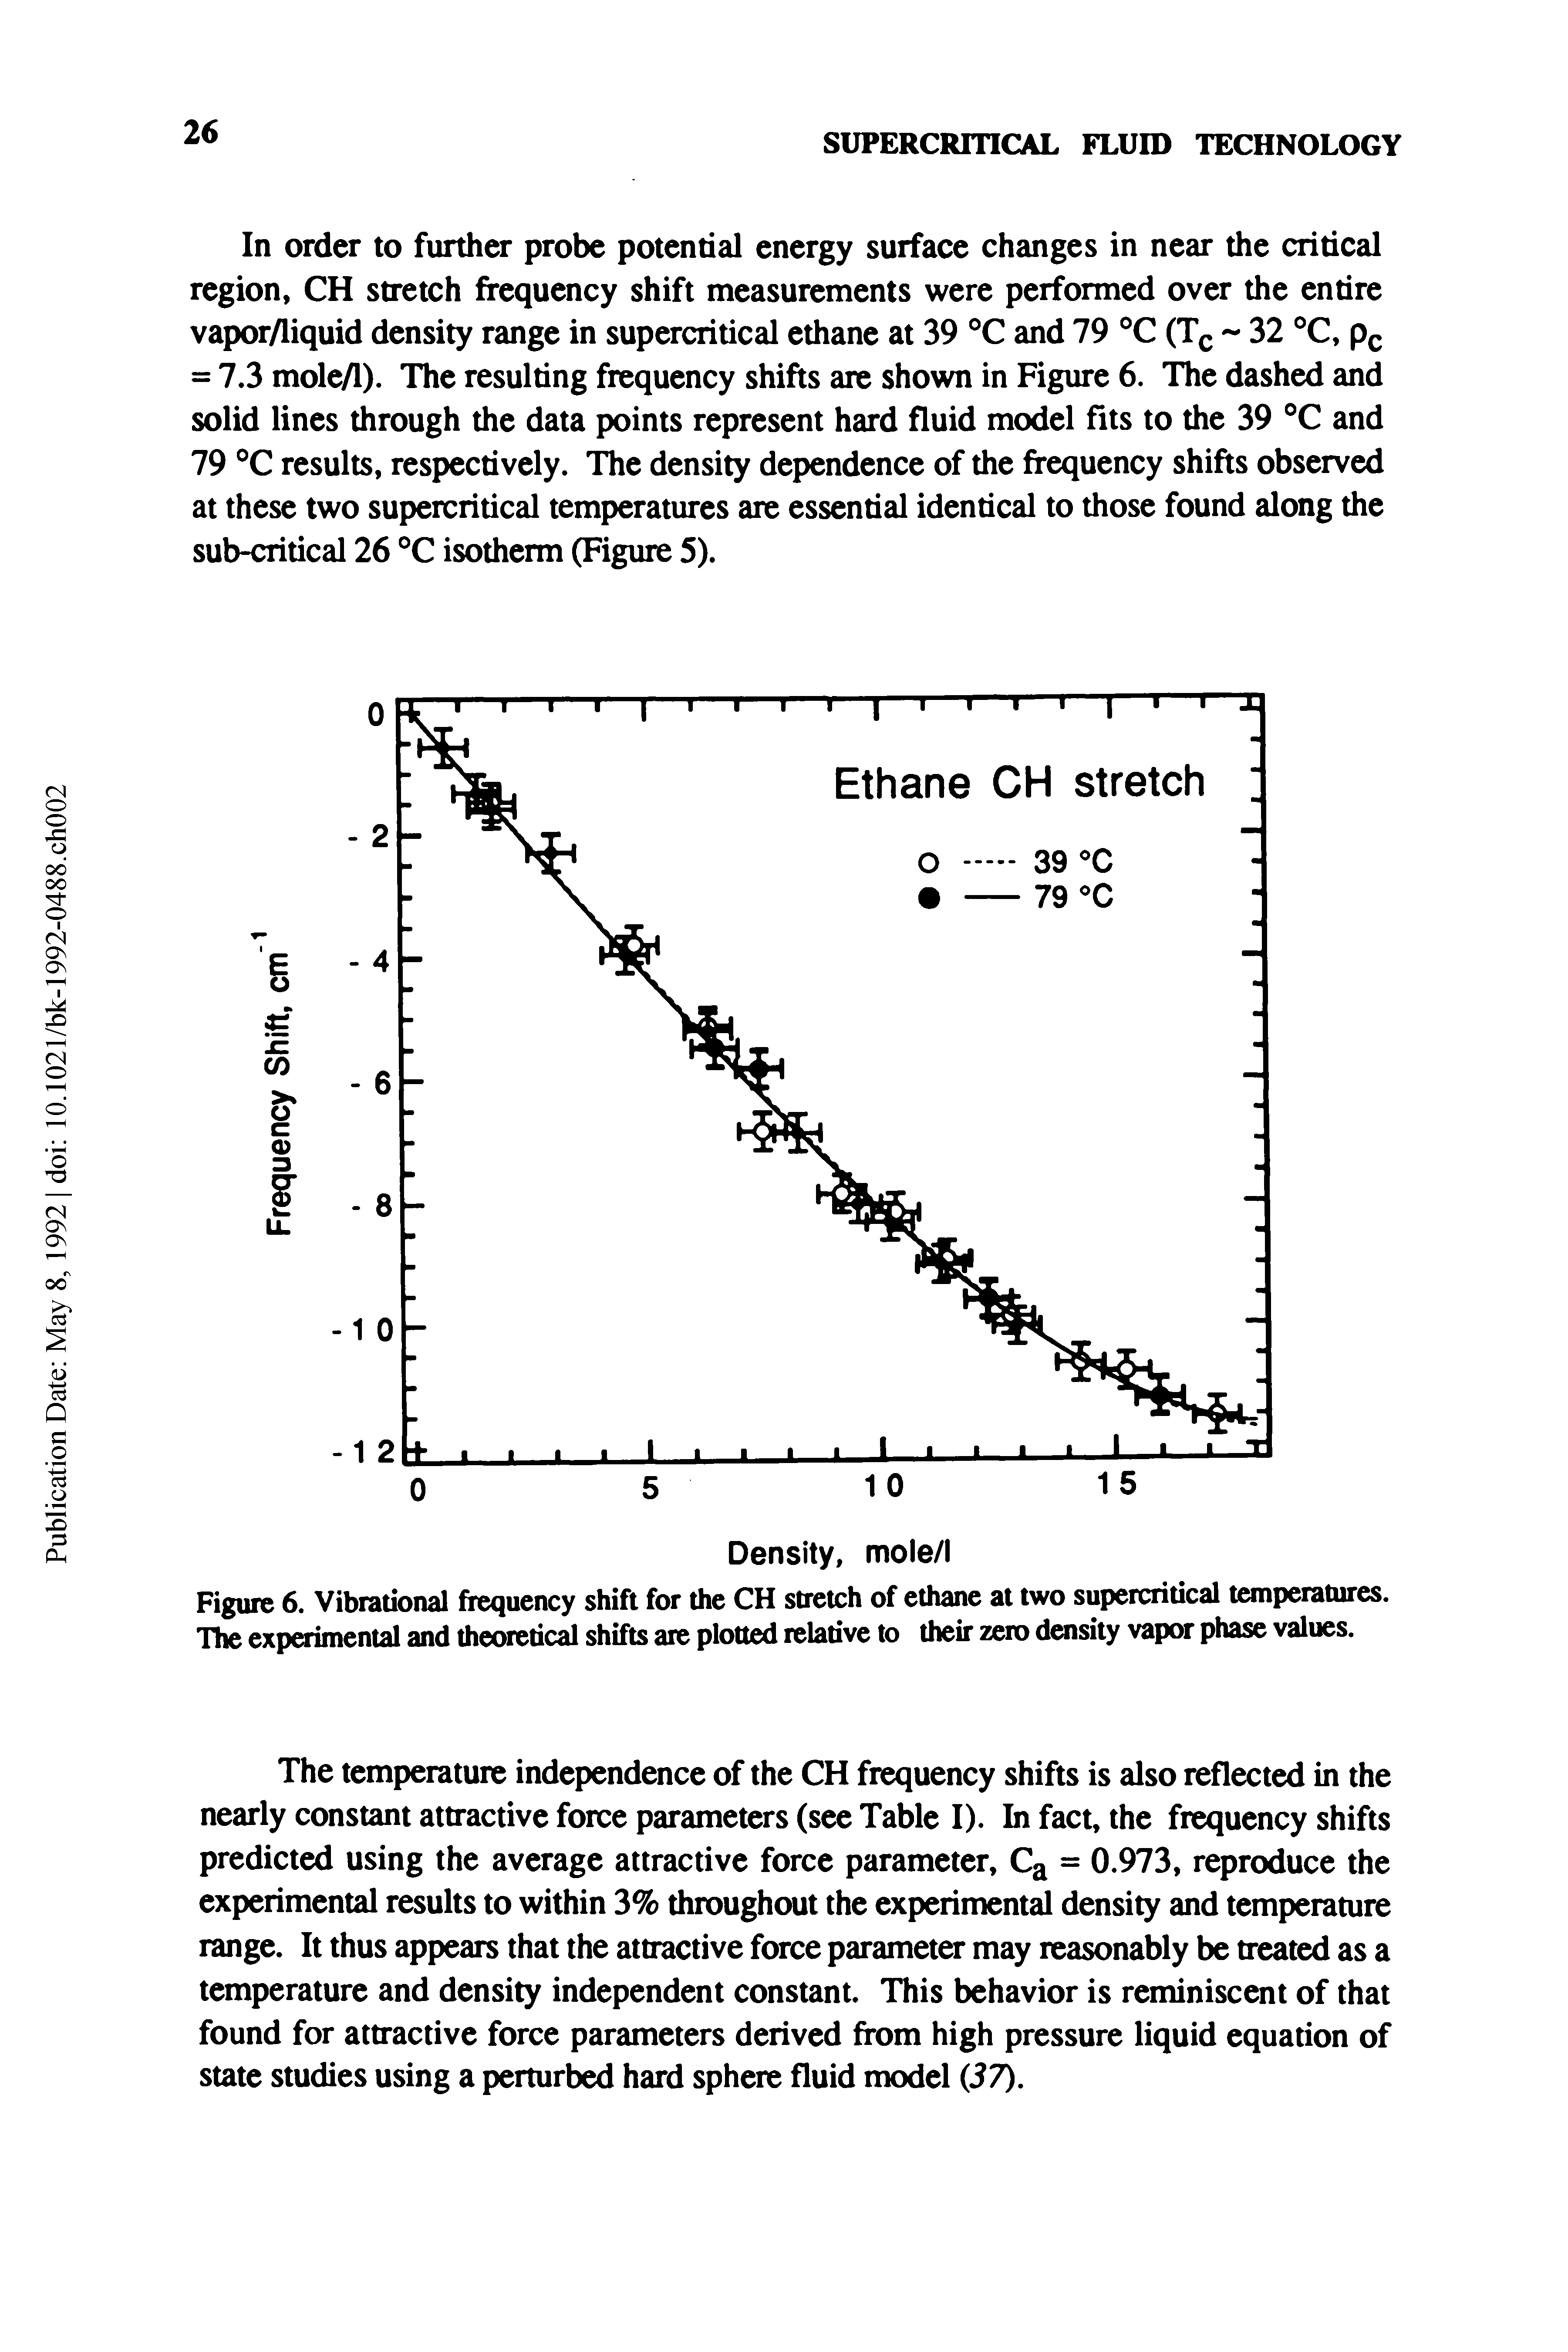 Figure 6. Vibrational frequency shift for the CH stretch of ethane at two supercritical temperatures. The experimental and theoretical shifts are plotted relative to their zero density vapor phase values.